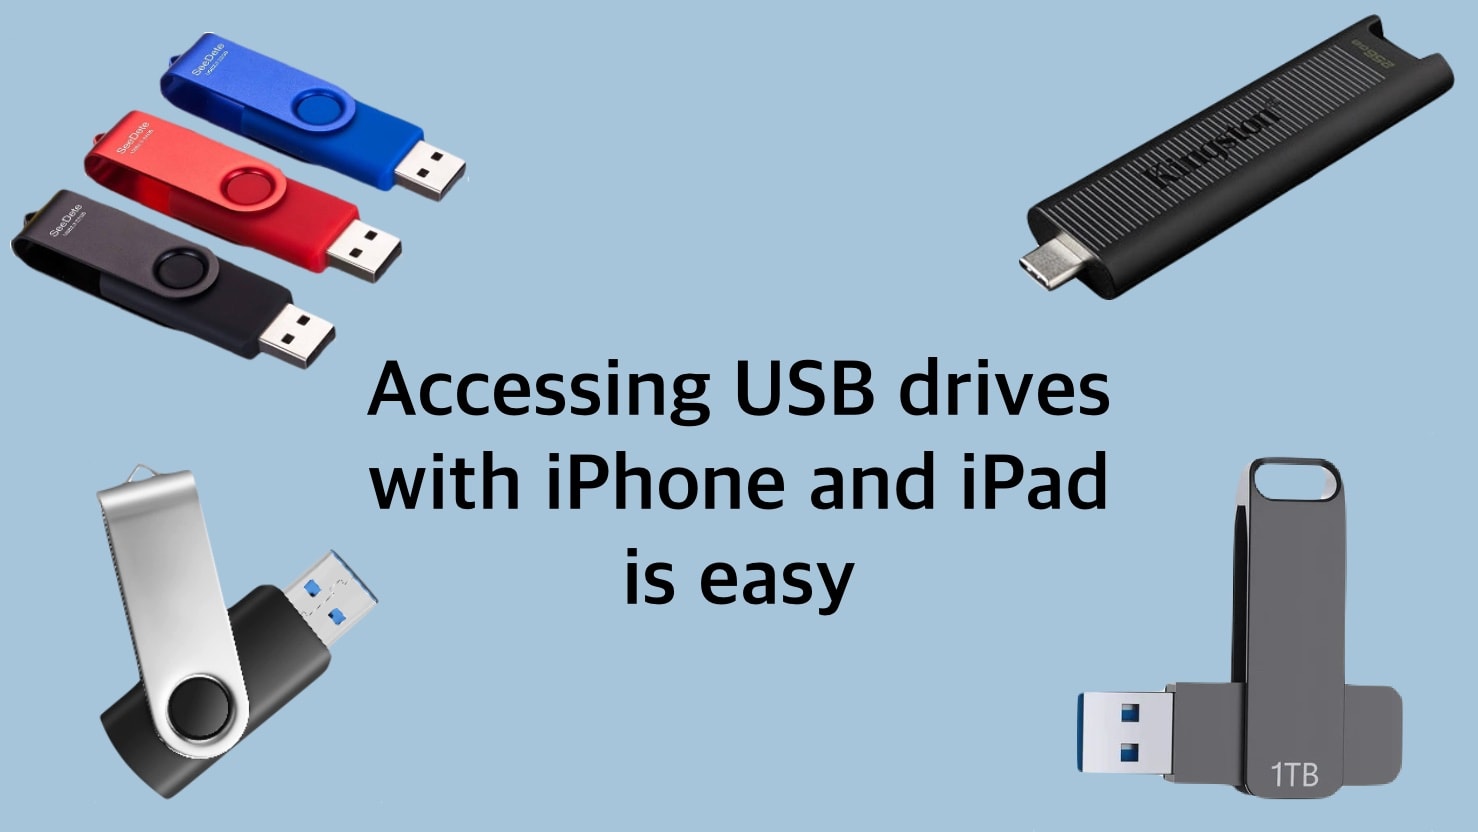 How to access a USB drive with iPhone or iPad